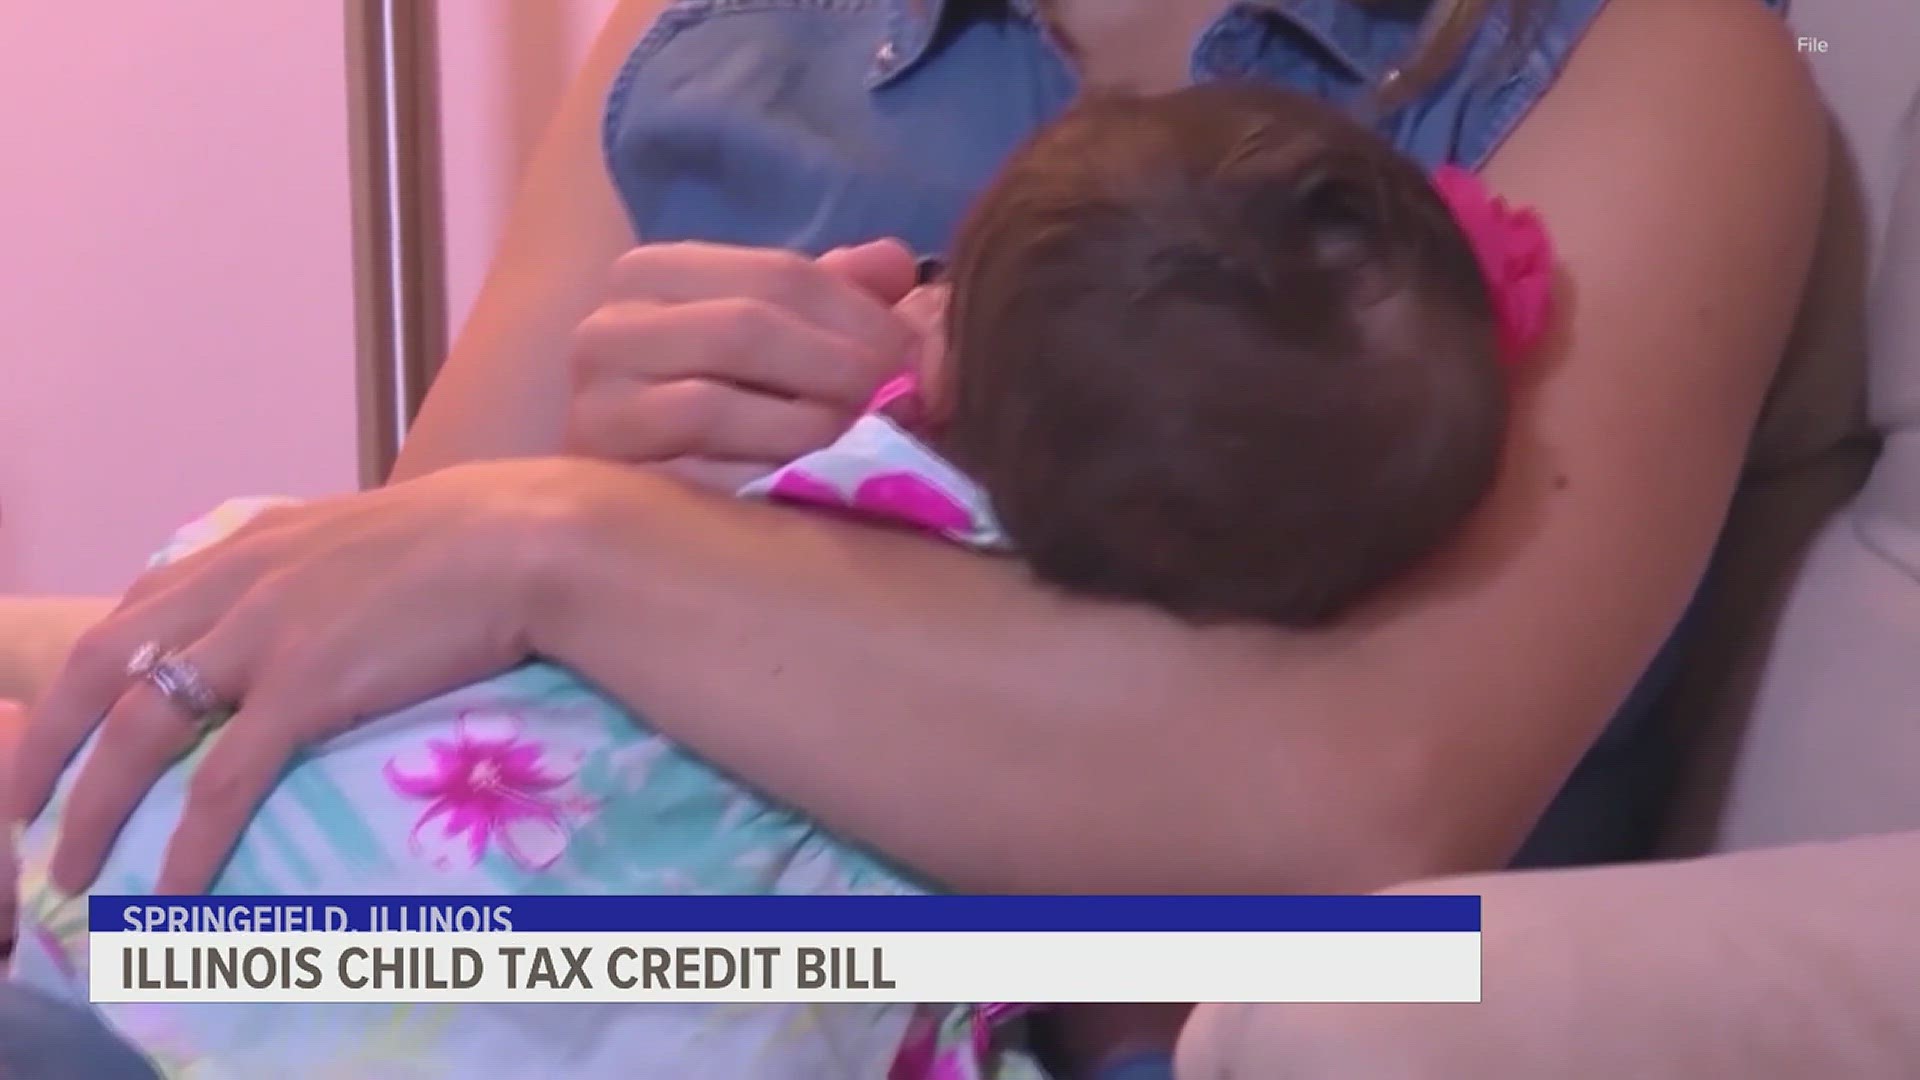 Families making less than the state median income would qualify for the tax credit.